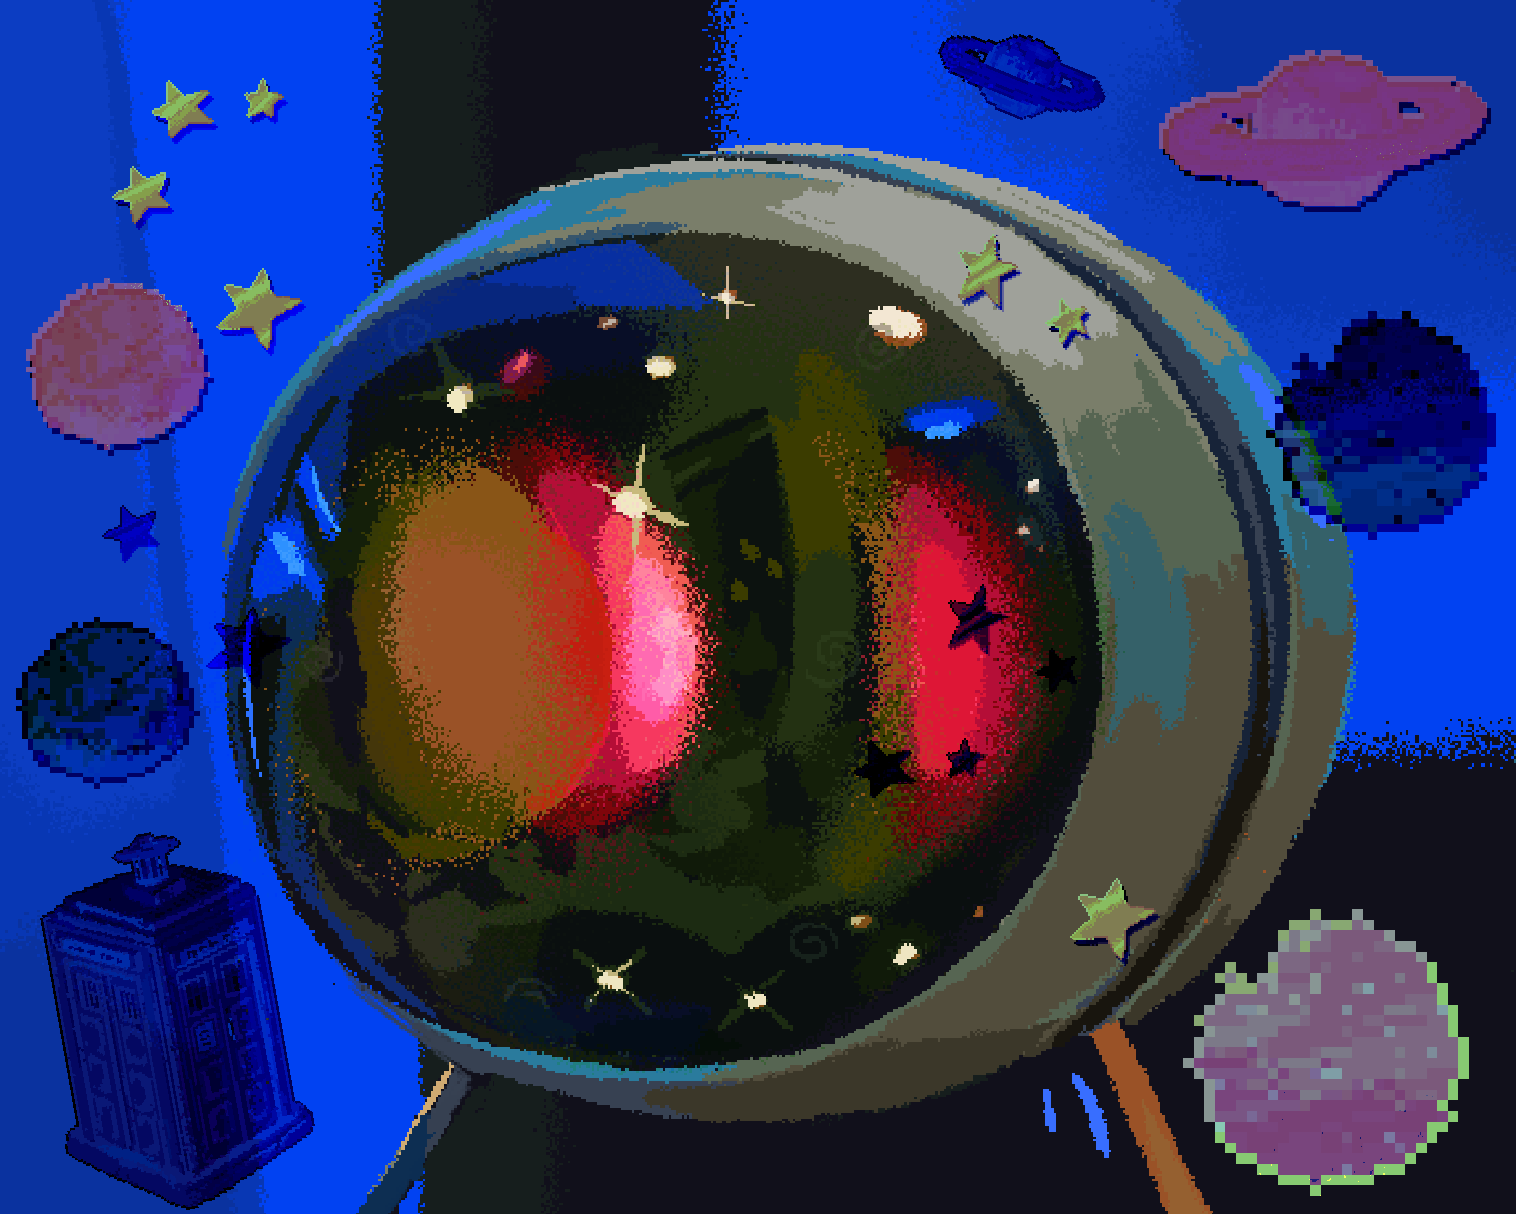 Pixel art drawing from the Doctor Who episode 'Ambassadors of Death'. It shows a television-like device that is round and has orange and red lights dancing in it, and it is also reflecting the room in front of it. There are also fake 'stickers' on top of the image showing stars, planets, and the TARDIS.